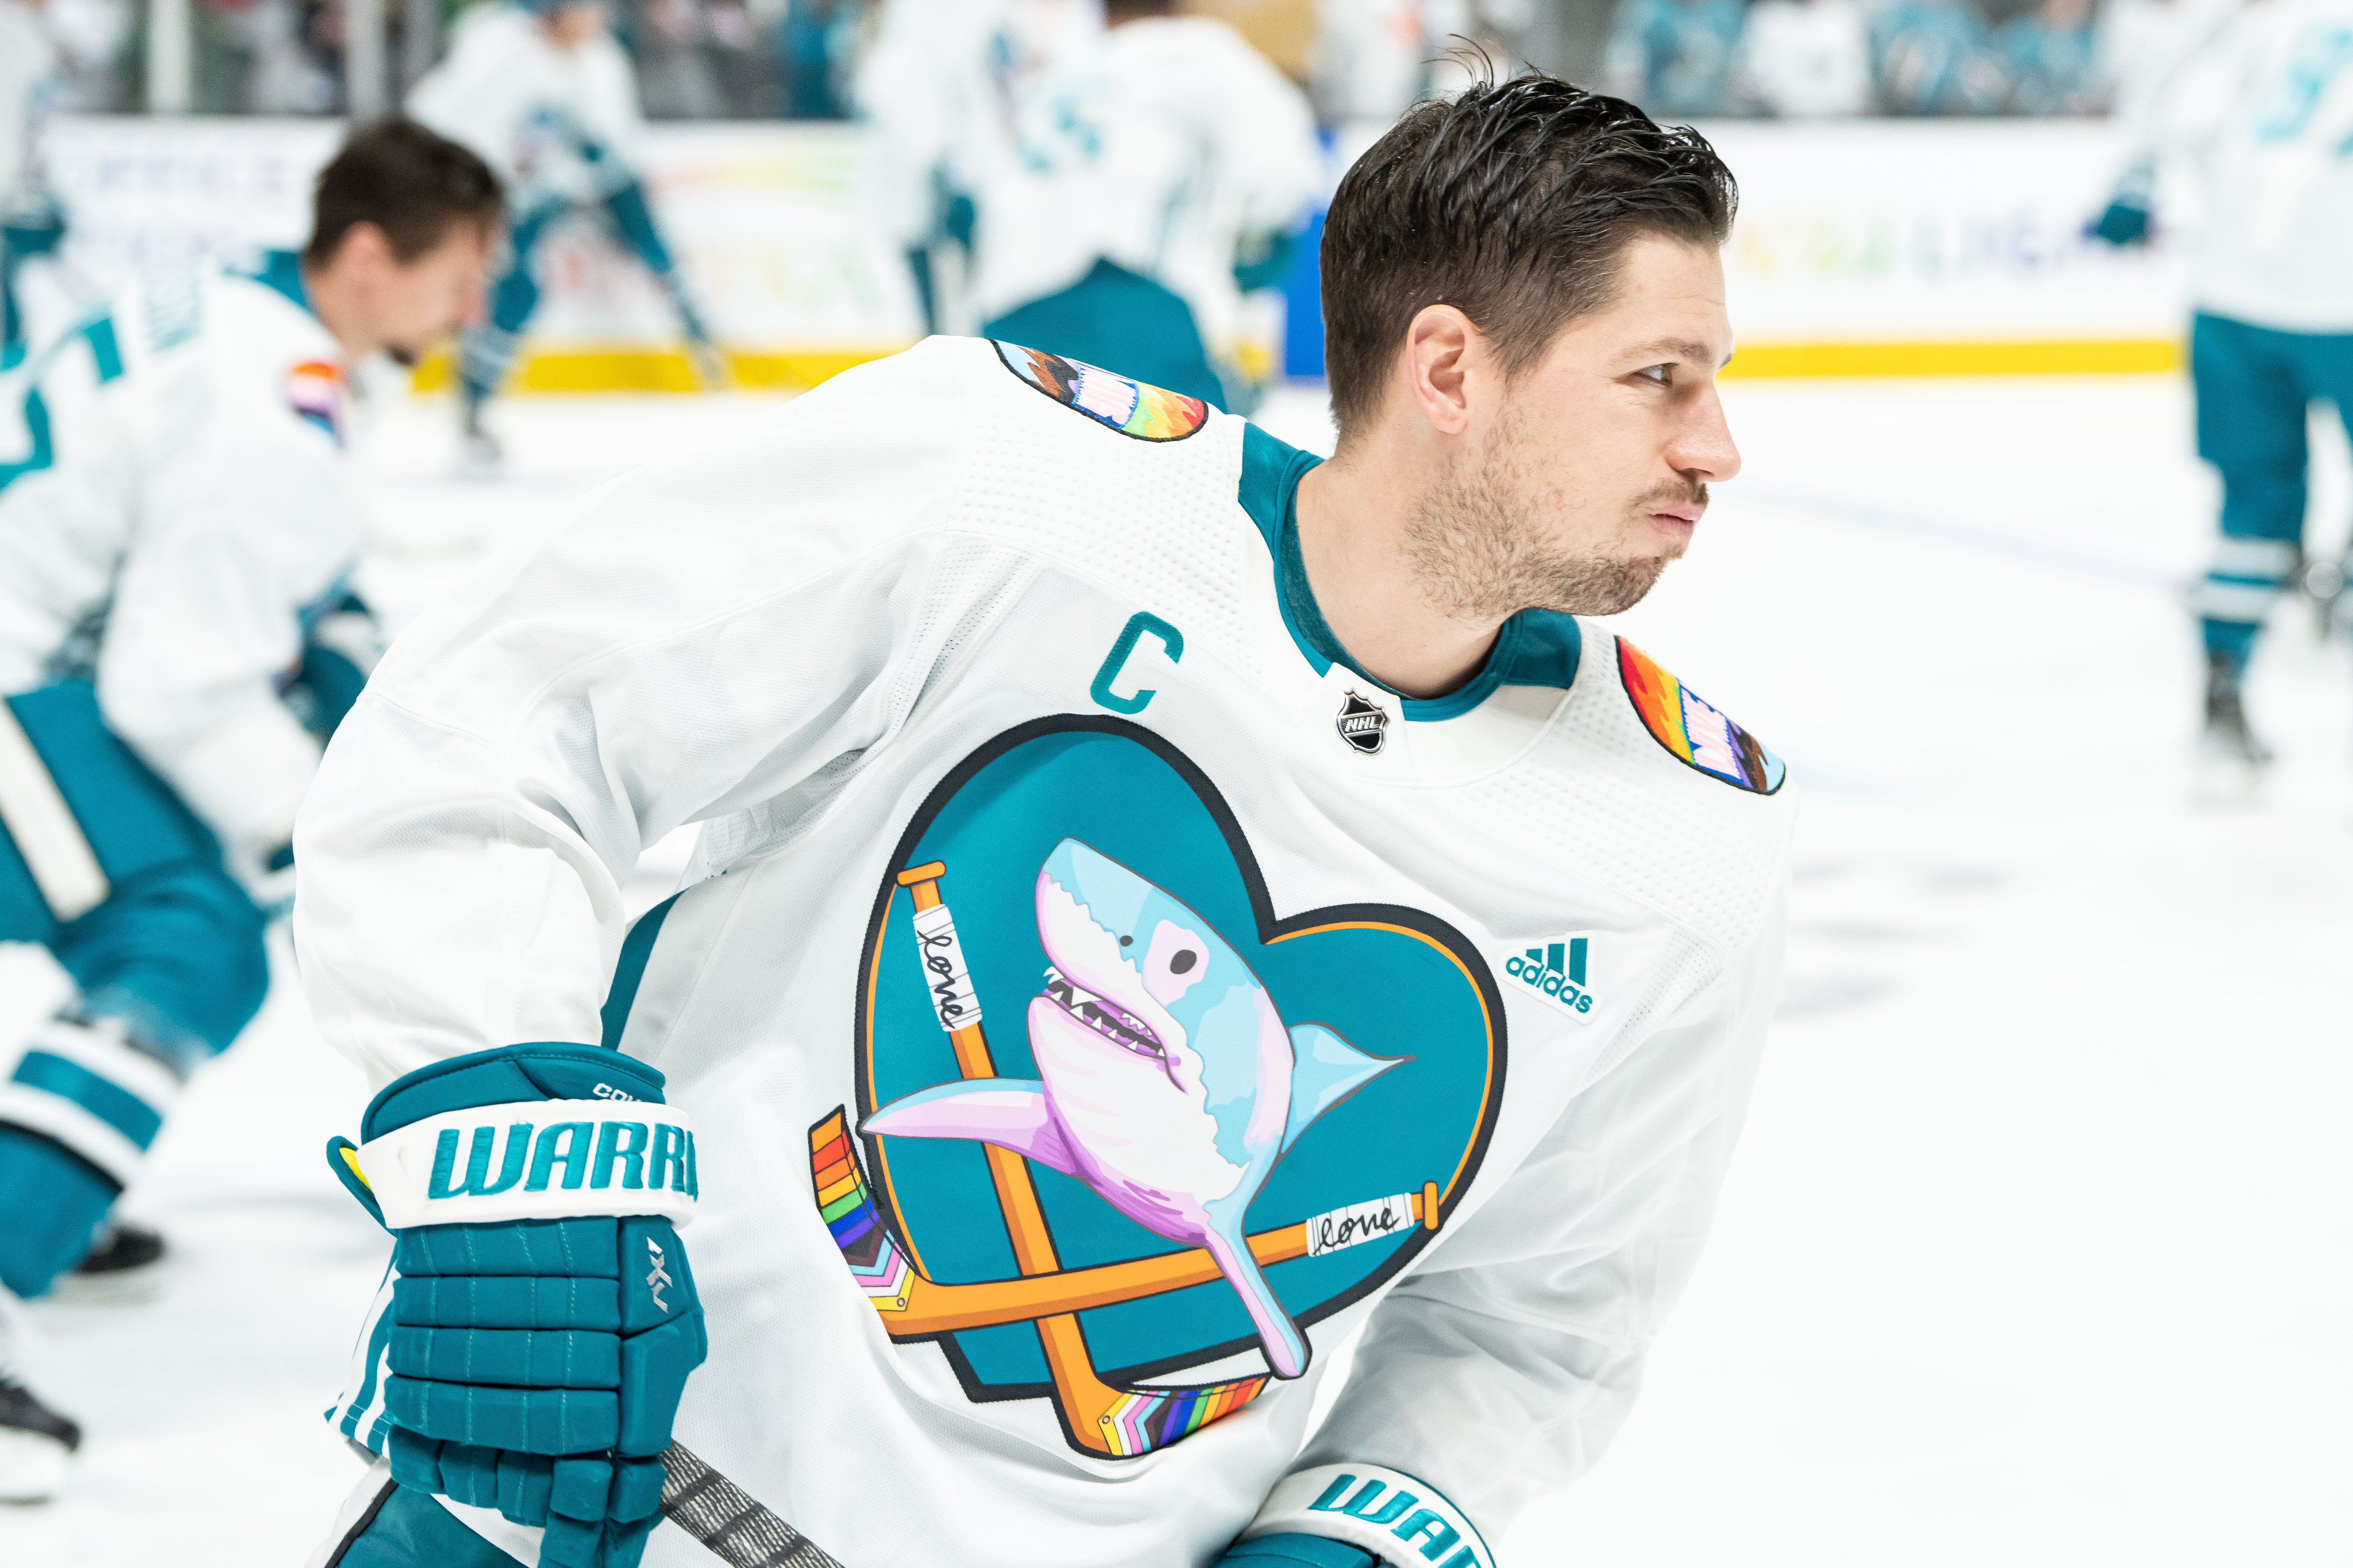 San Jose Sharks on X: Love wins & so does this jersey😍 🏳️‍🌈🏳️‍⚧️  Tonight's jersey auction benefitting @acsteens is now live! Bid for your  very own Sharks Pride warmup jersey! 